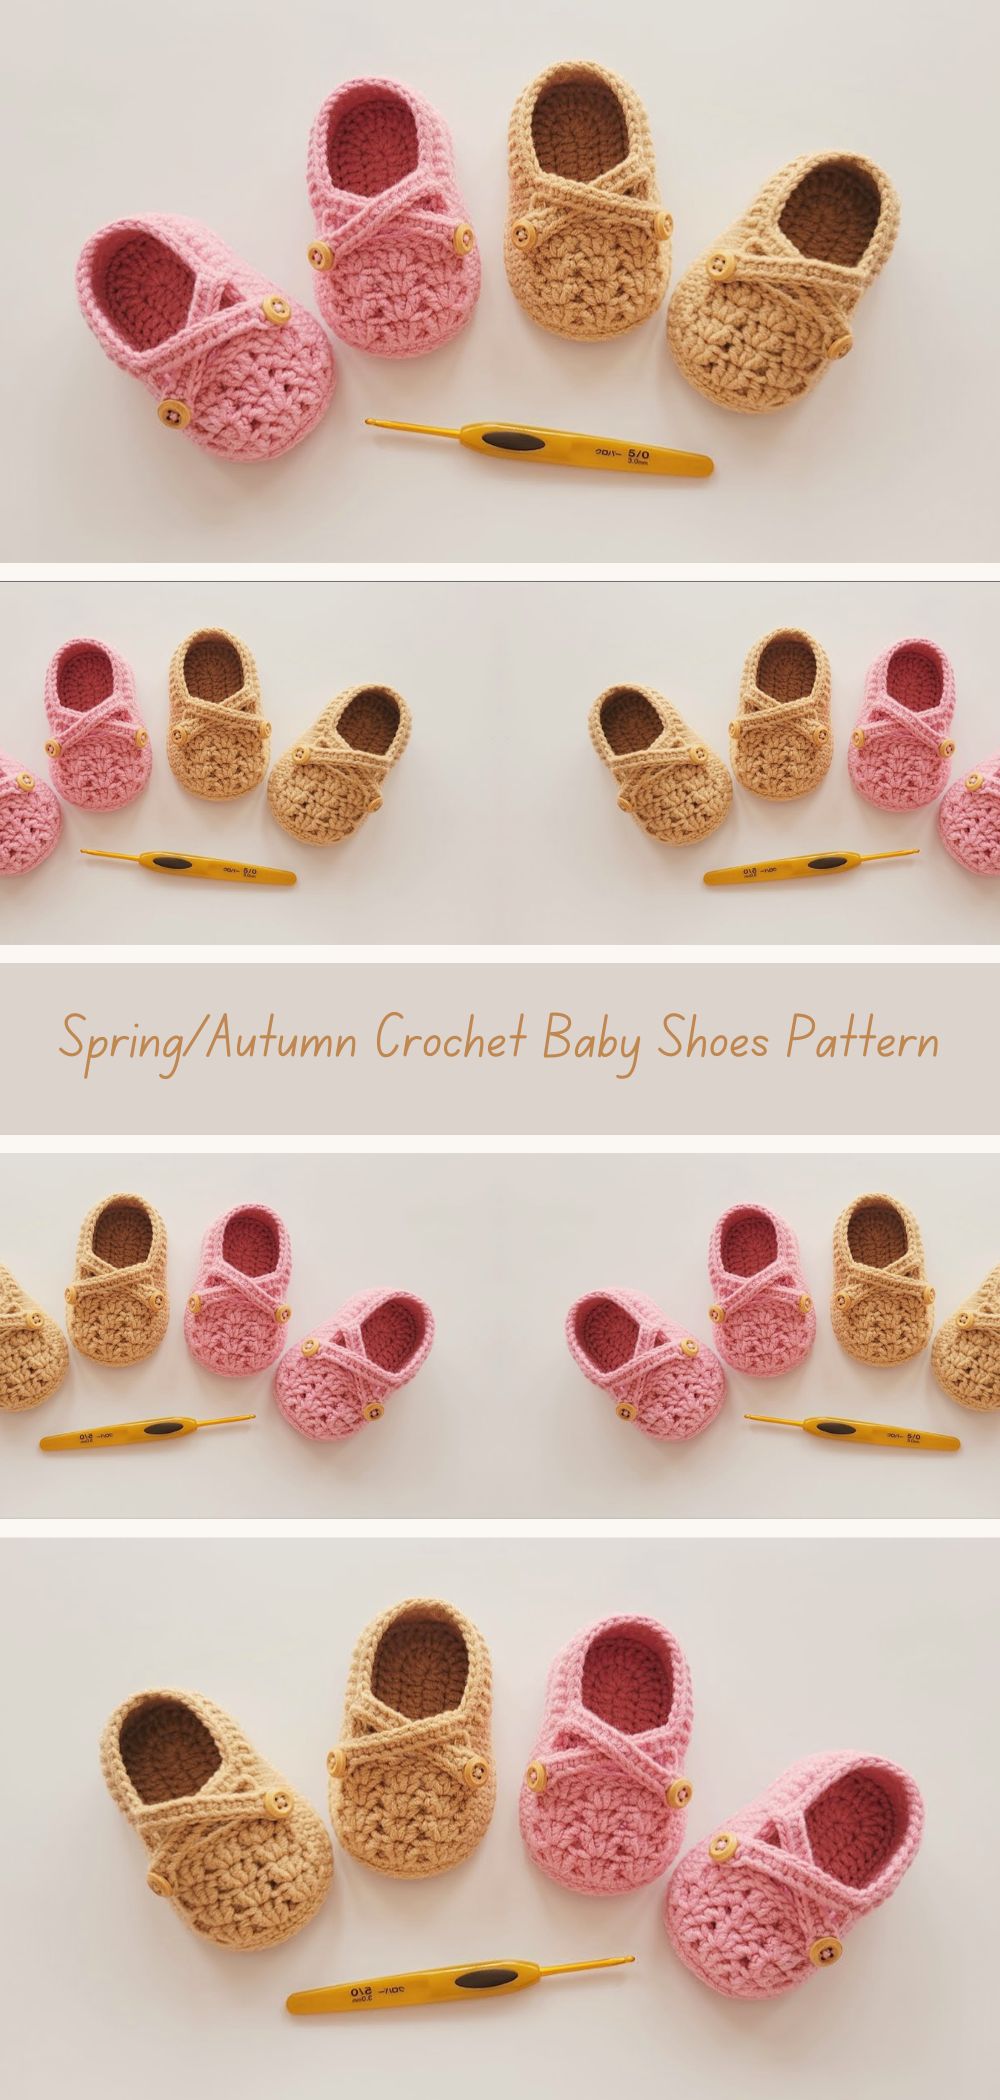 Spring/Autumn Crochet Baby Shoes Pattern - Create cozy and stylish footwear for your baby with this versatile crochet pattern